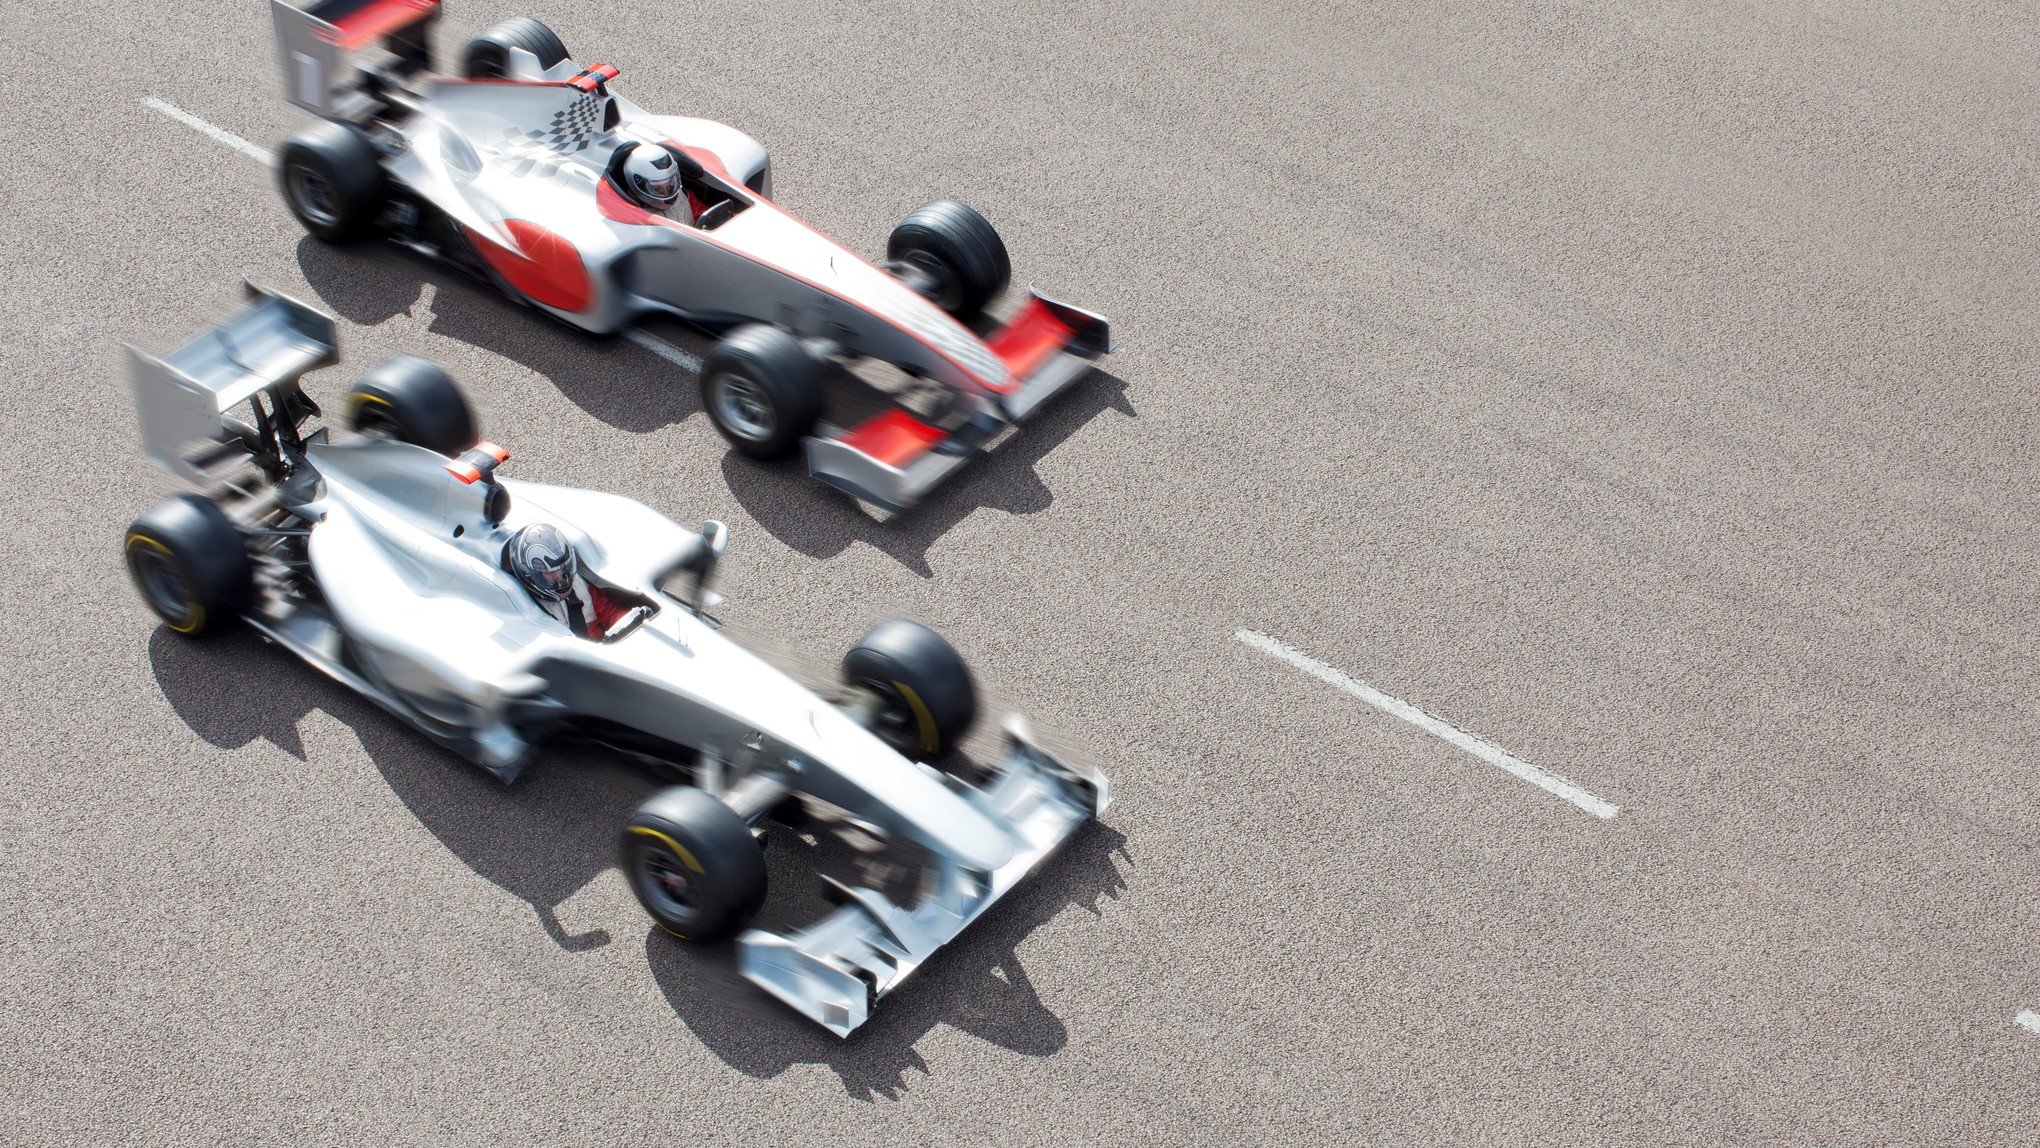 image of two race cars neck and neck